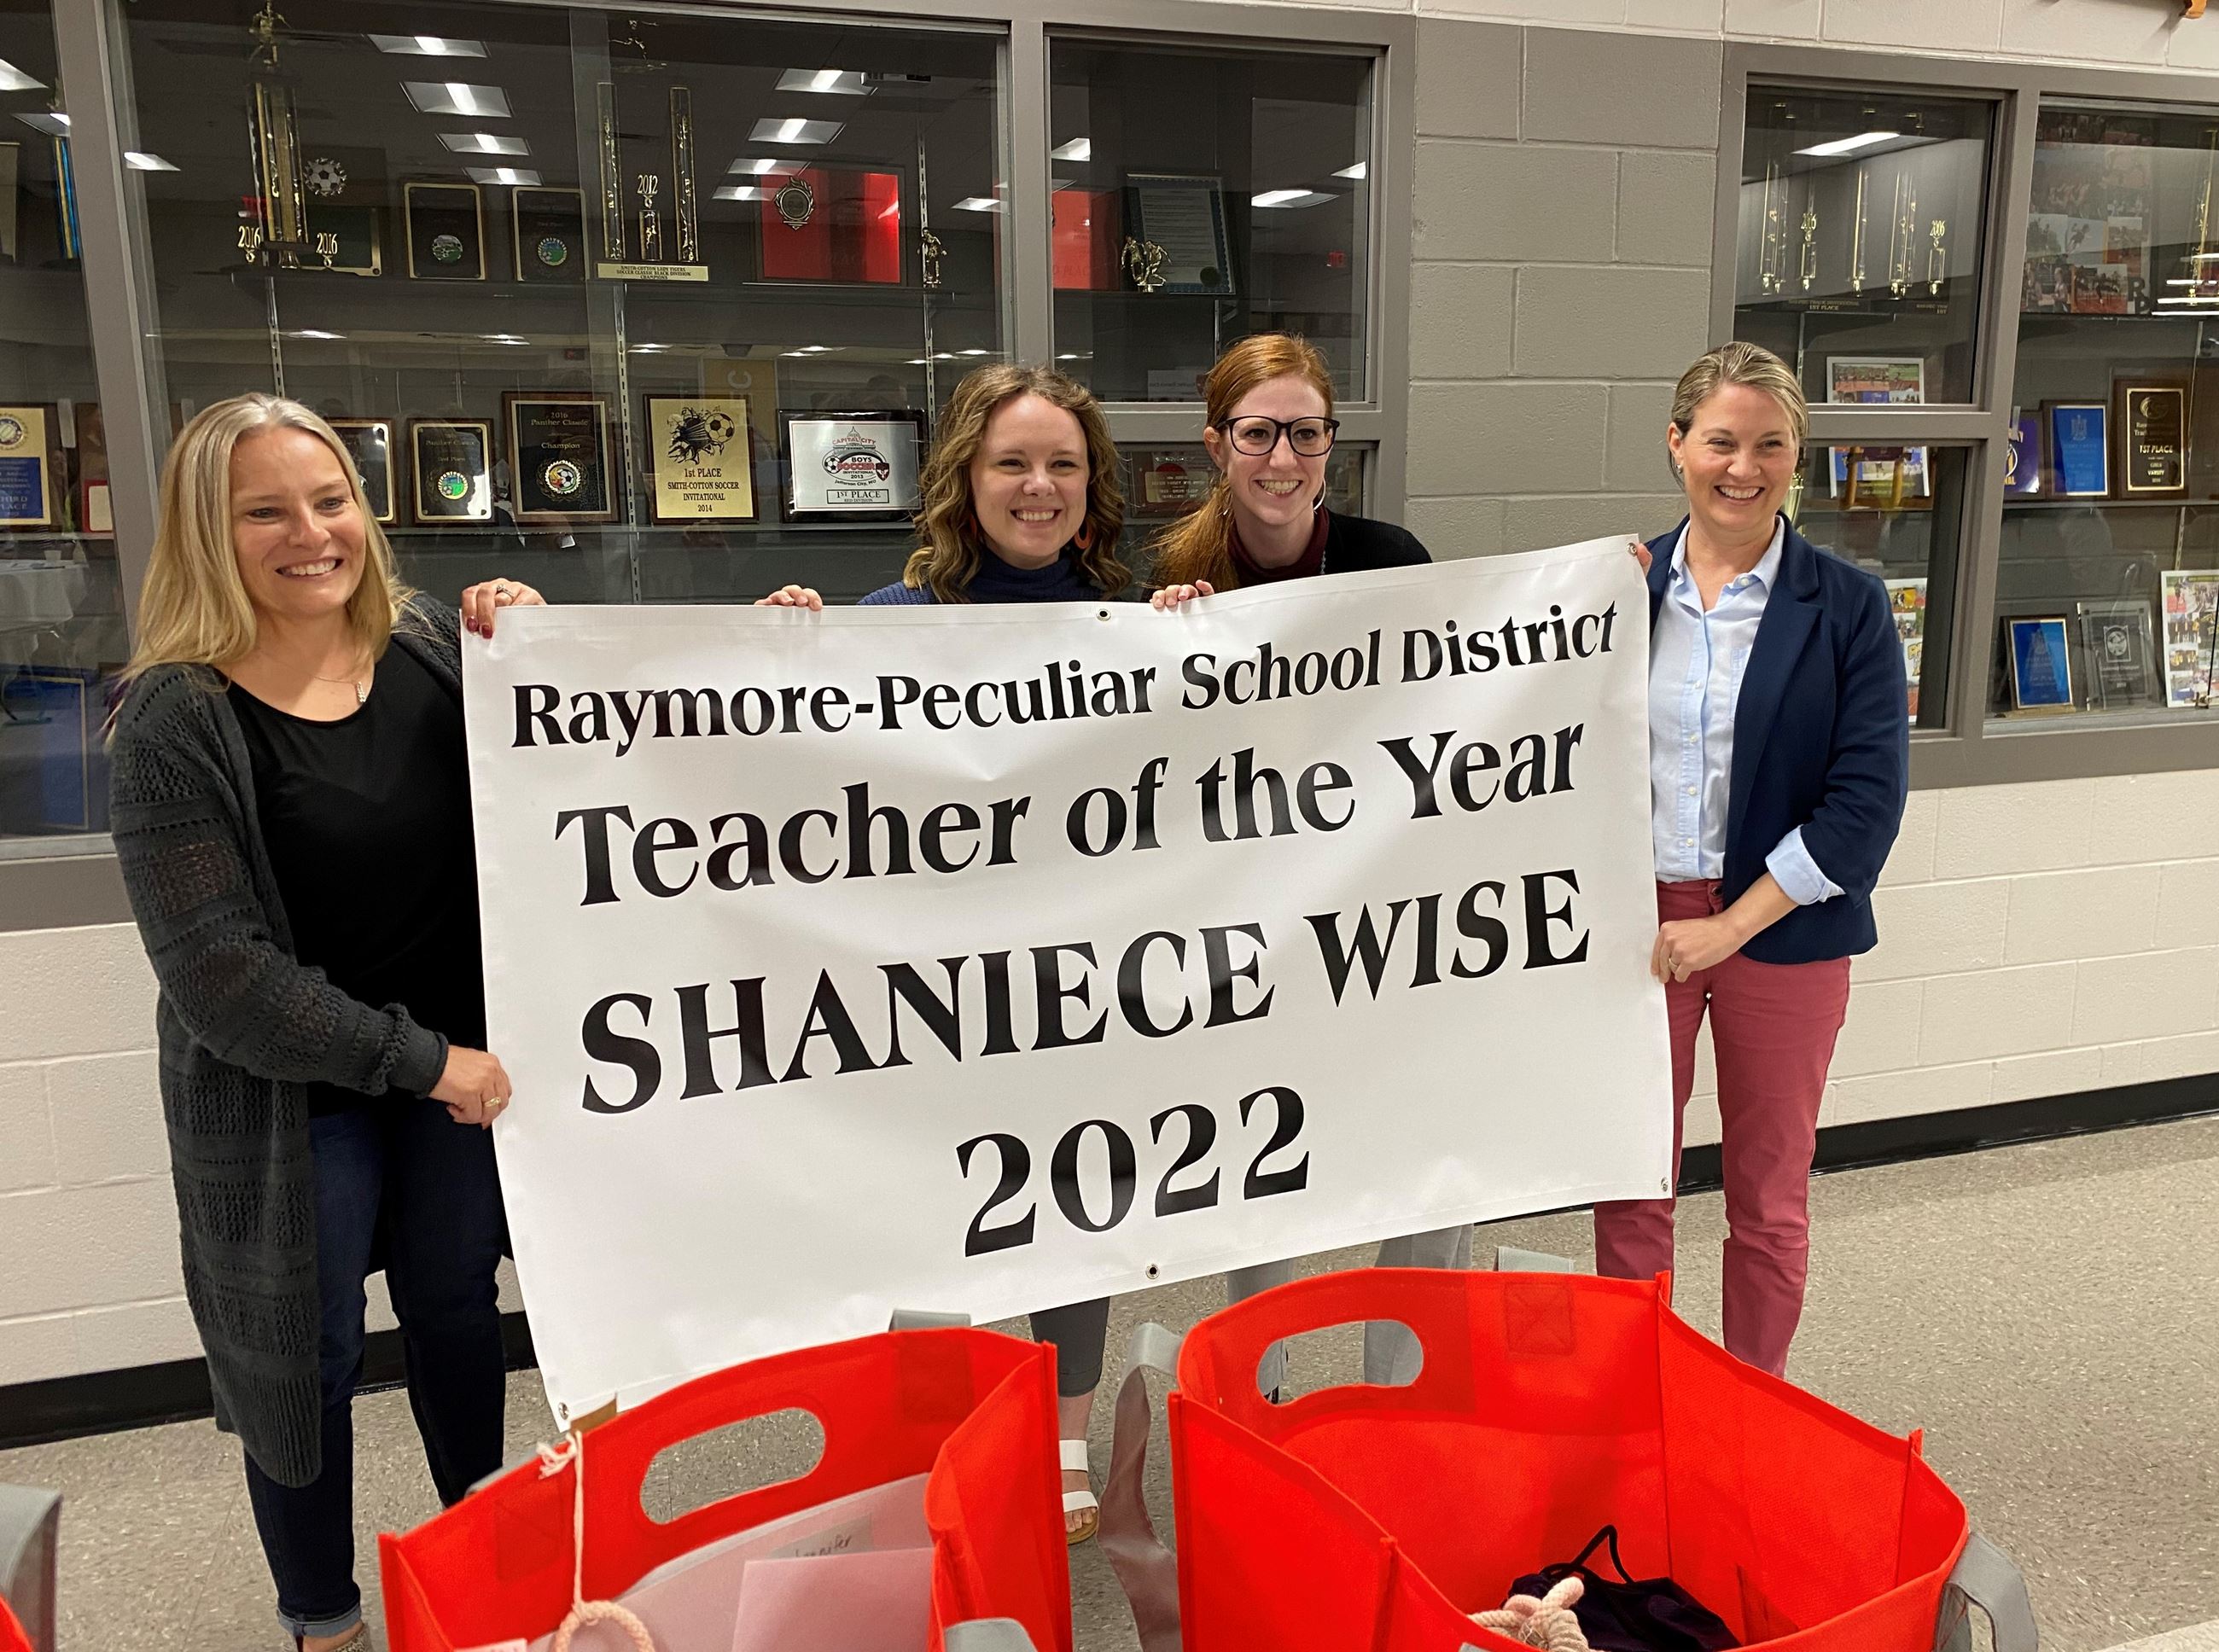 From left to right: 2019 Teacher of the Year Jennifer Vacca, 2022 Teacher of the Year Shaniece Wise, Timber Creek Elementary Principal Dr. Lauren Gechter, and 2011 Support Staff Employee of the Year Allison Scott.